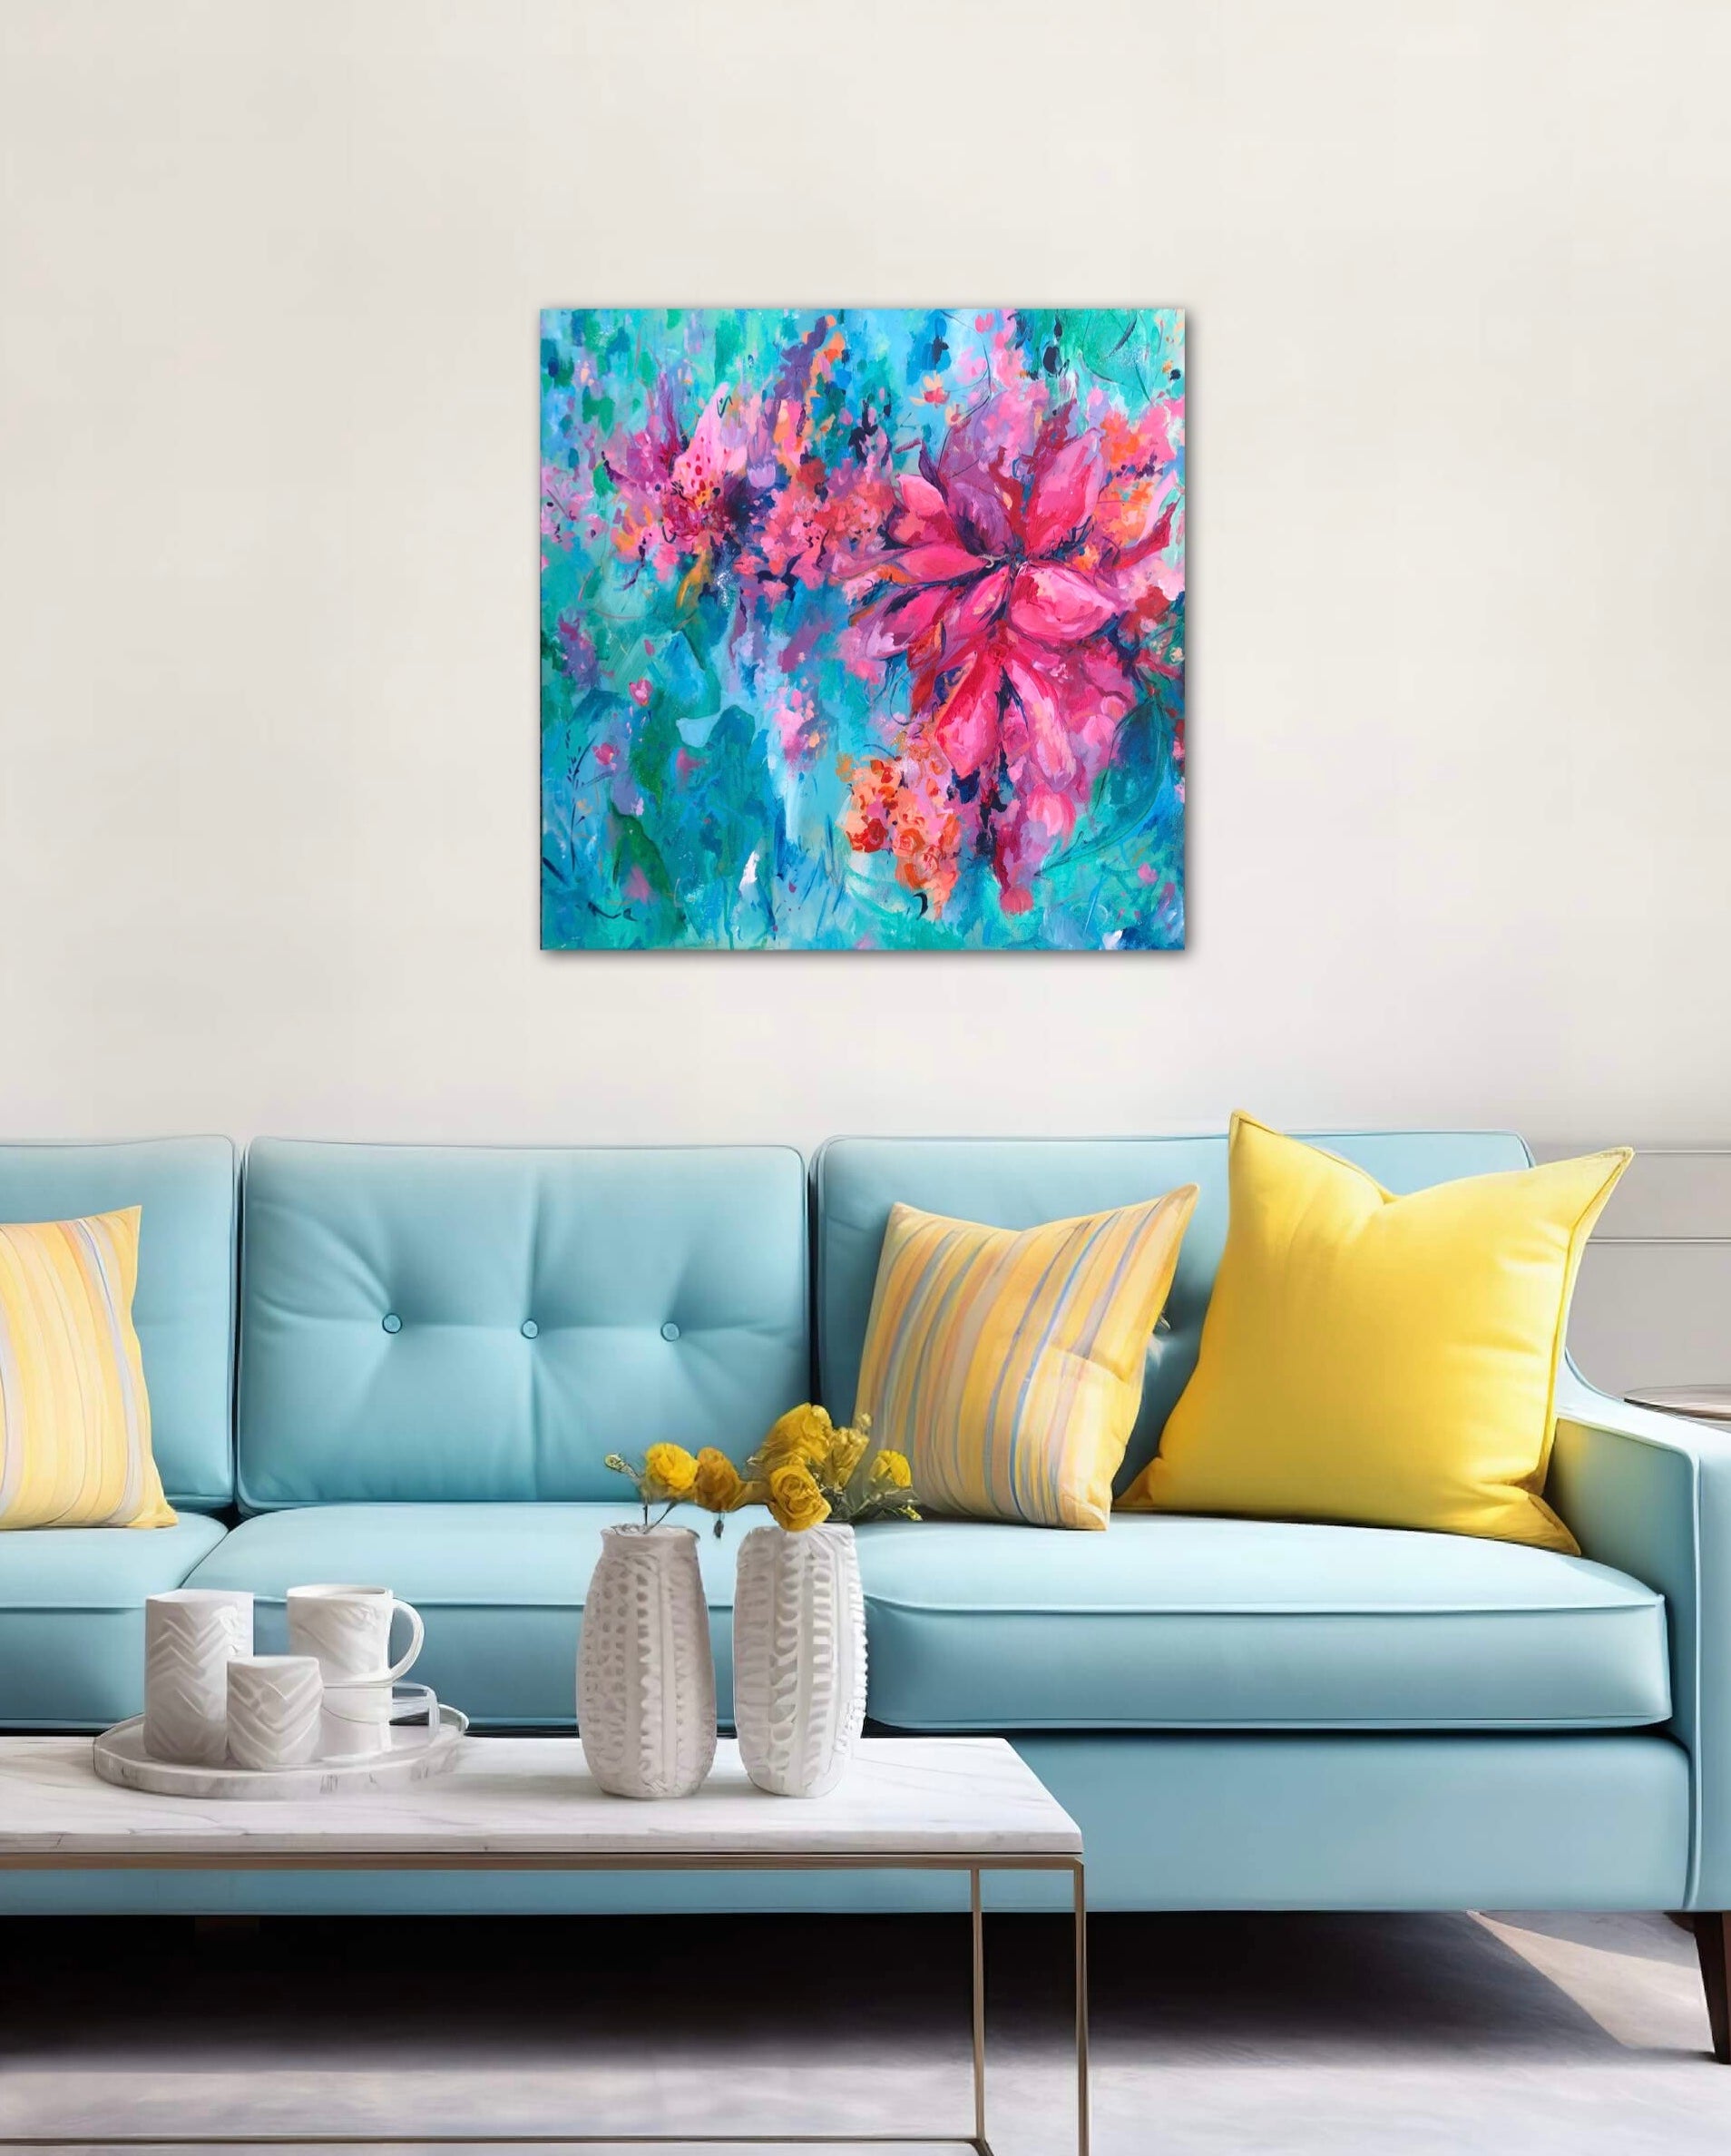 Free Spirit colourful, square shaped floral painting displayed on a white wall above a light blue sofa with yellow cushions